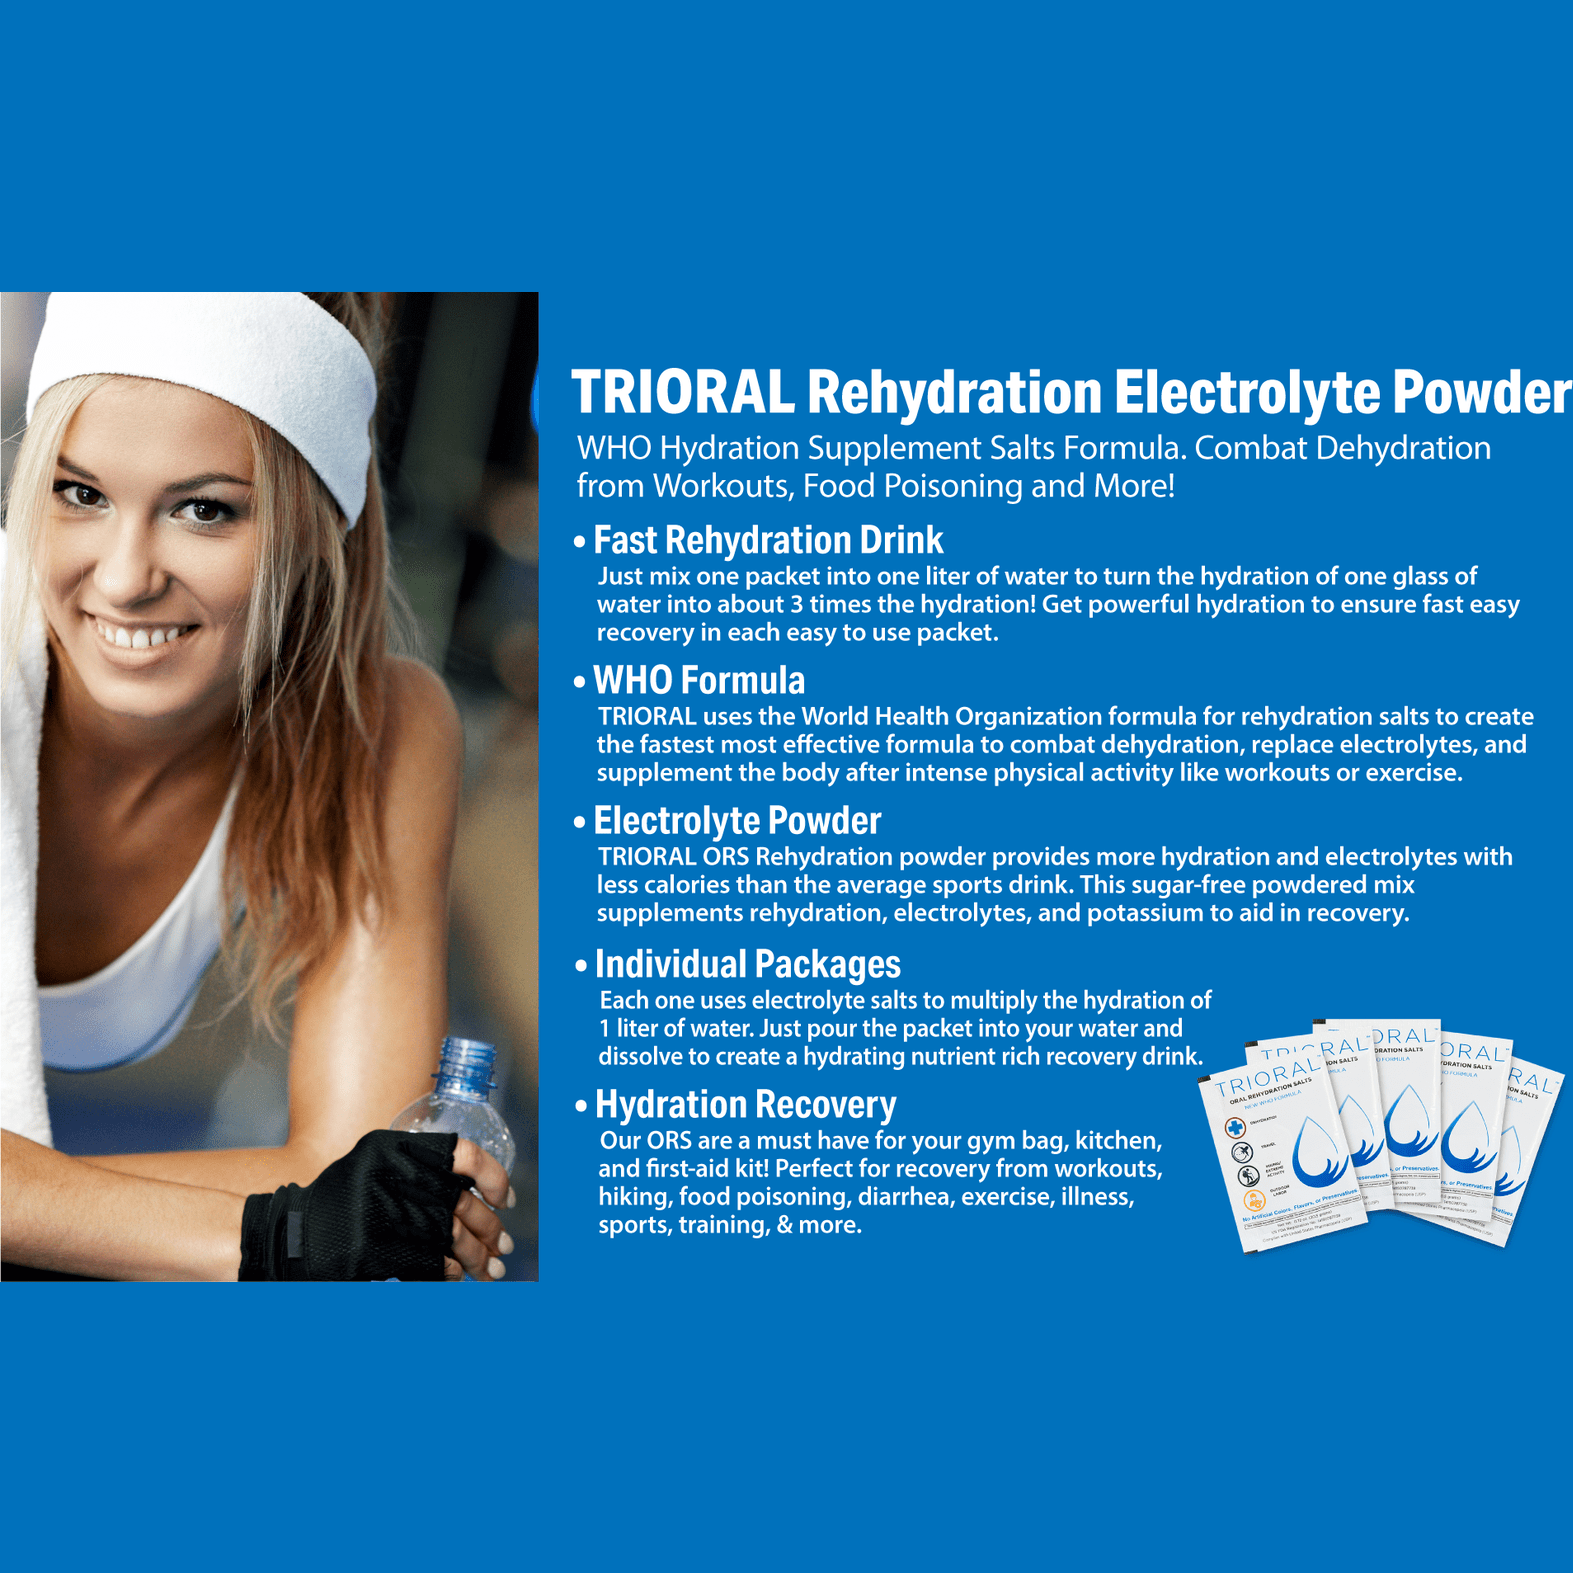 TRIORAL Rehydration Electrolyte Powder - WHO Hydration Supplement Salts Formula - Combat Dehydration from Workouts, Fluid Loss and Much More - 100 Drink Mix Packets